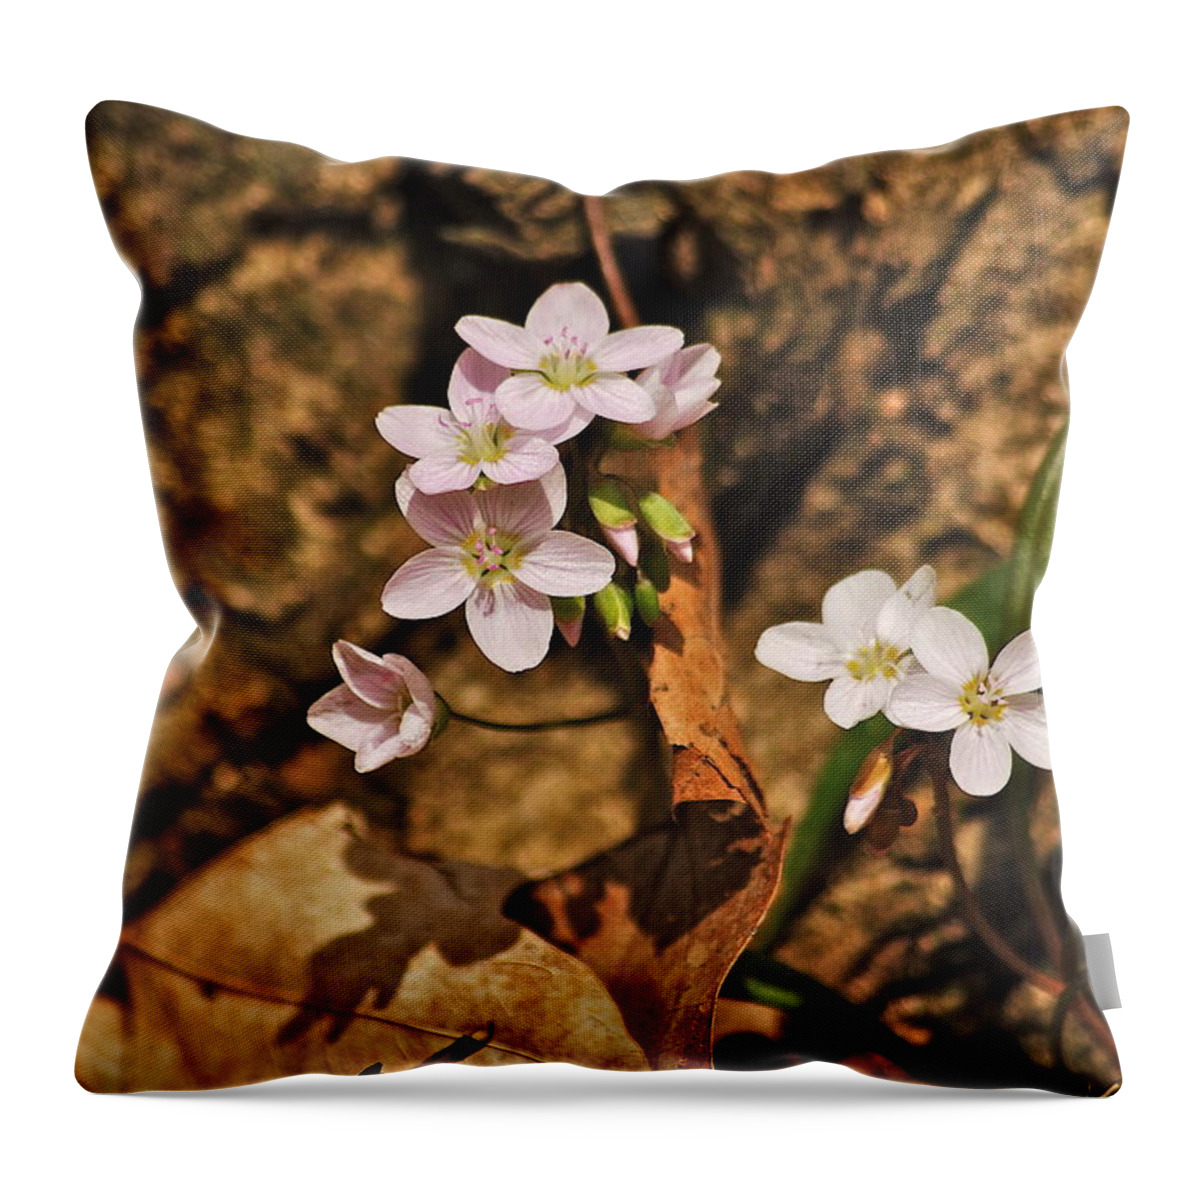 Spring Throw Pillow featuring the photograph Spring Beauty by Michael Peychich